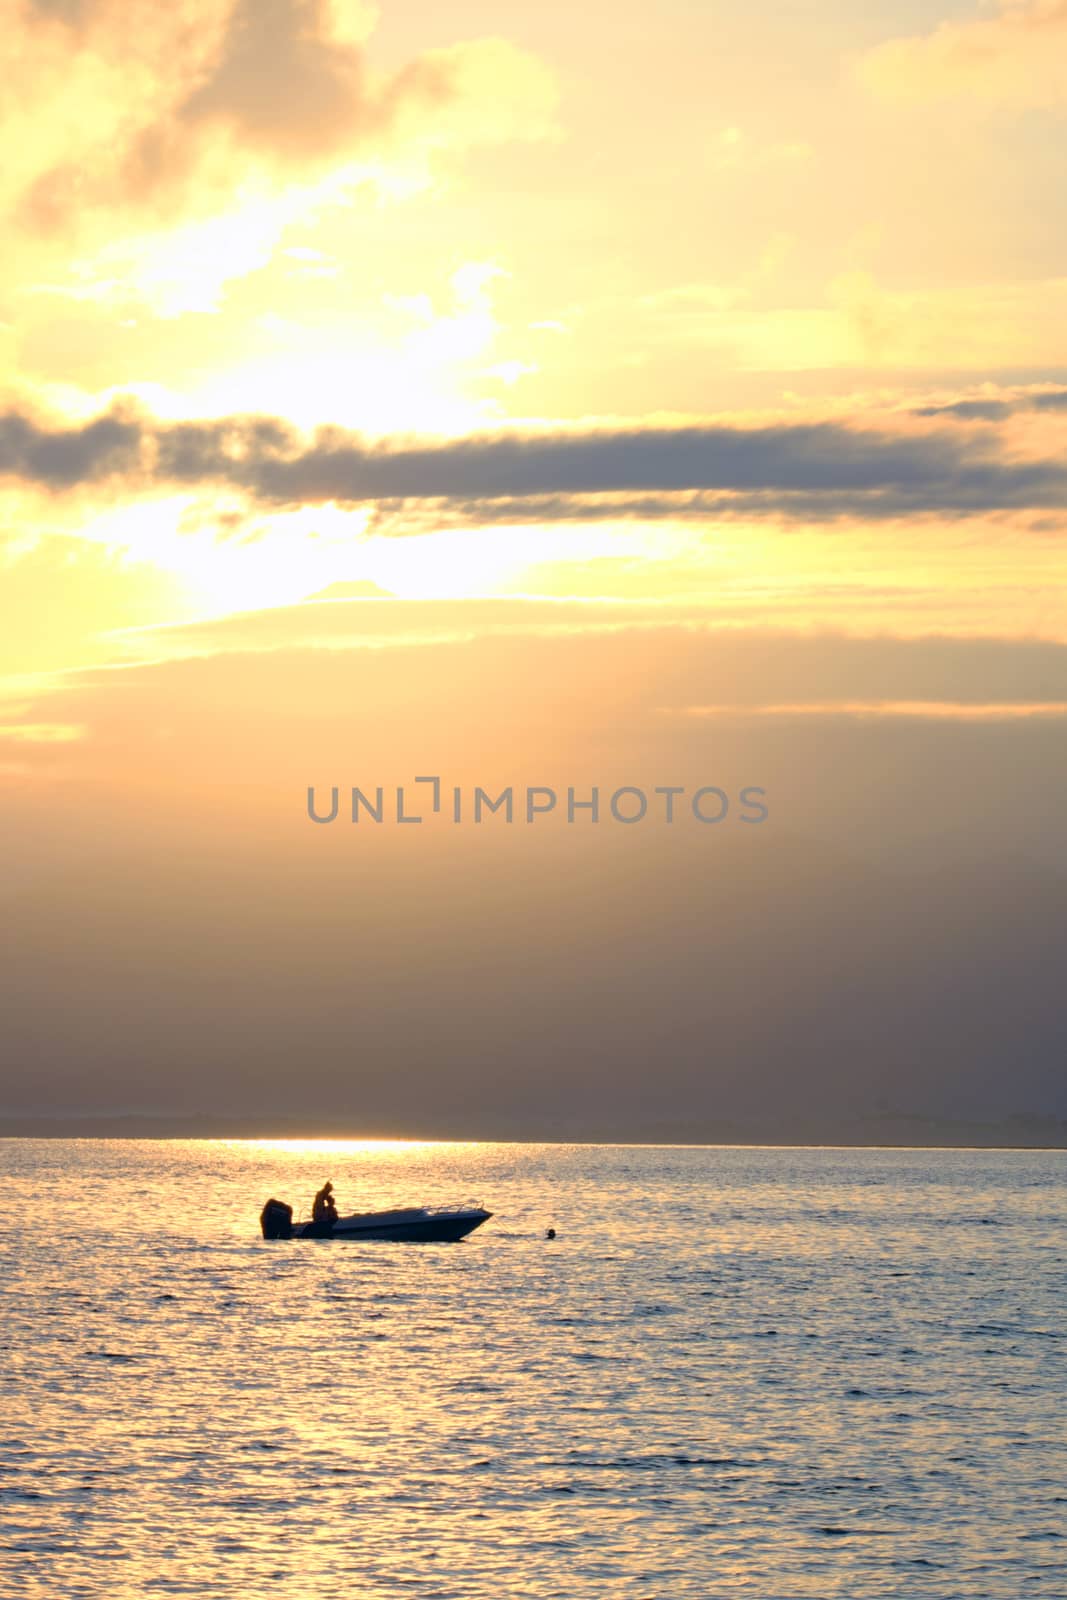 Boat with snorkelers at the sunrise at the sea by rainfallsup